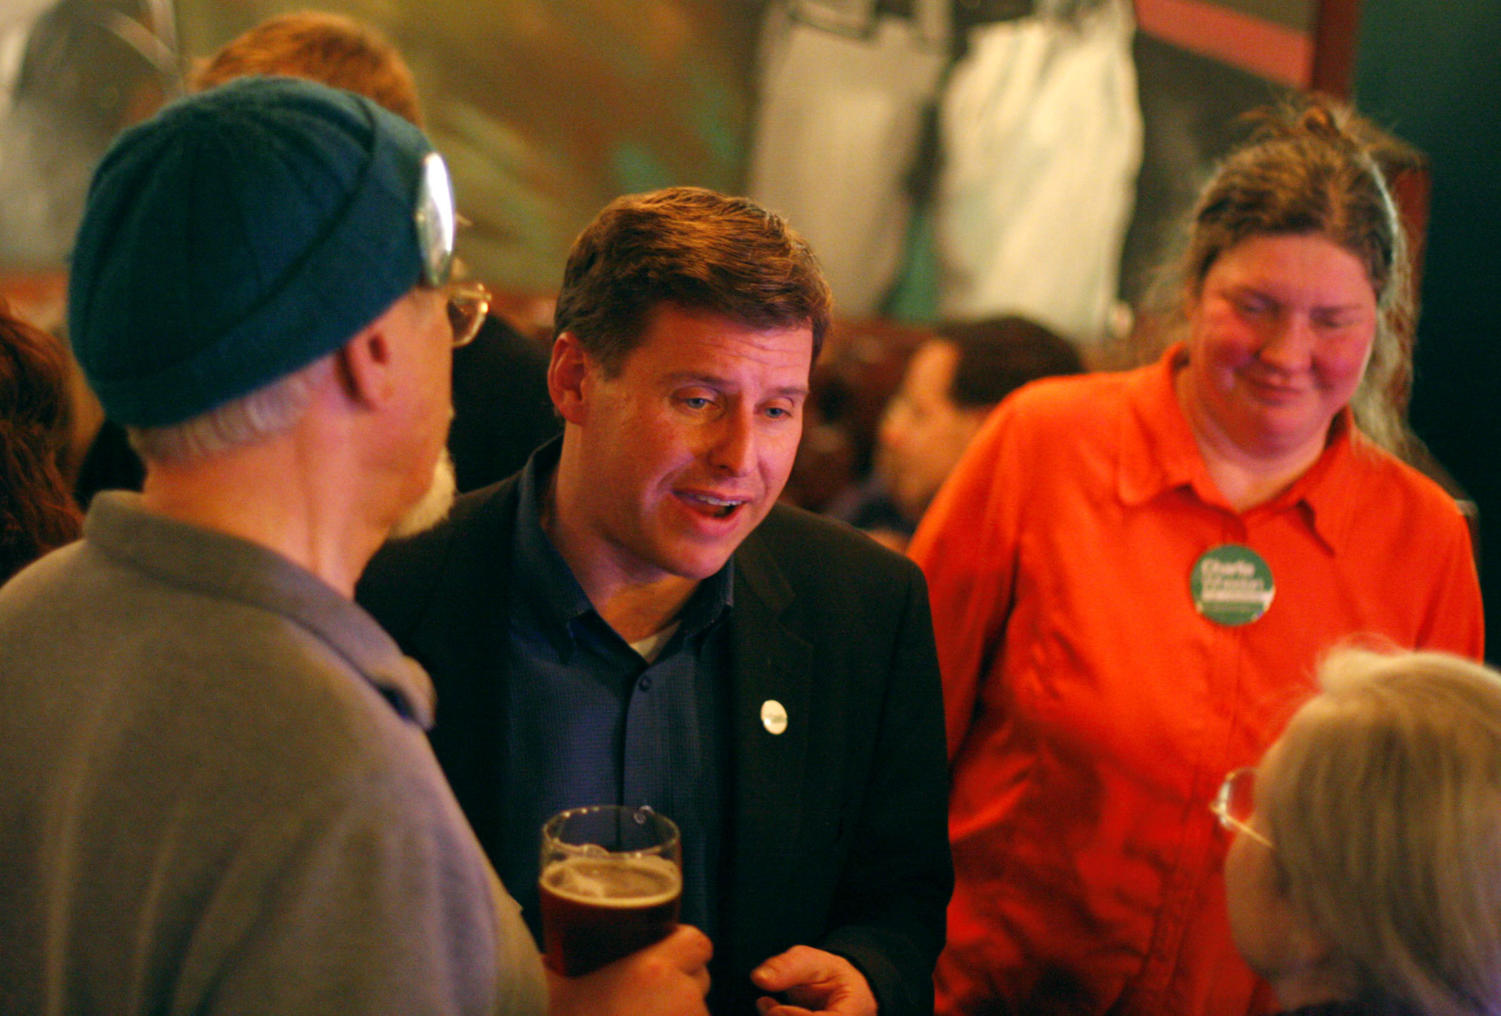 Charles Wheelan, professor at the Harris School of Public Policy, speaks with three supporters on the night of Illinois's 5th Congressional District Democratic primary Tuesday. Later in the night, Wheelan conceded the election at the Goose Island Brewery in front of family, friends, and supporters.